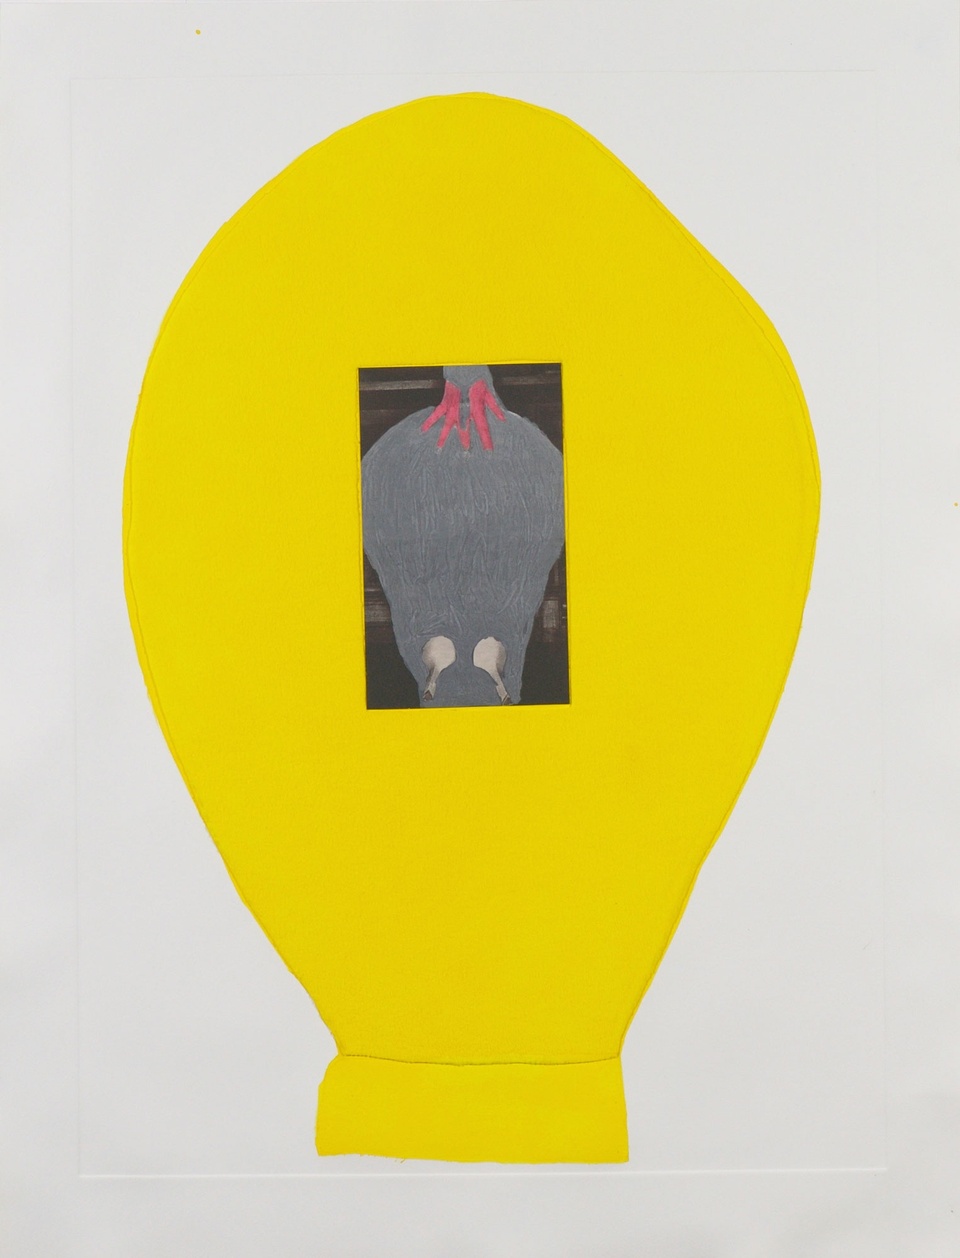 Image of kneeling figure in high heels obscured by gray and surrounded by a yellow thumb-shaped frame on a white background